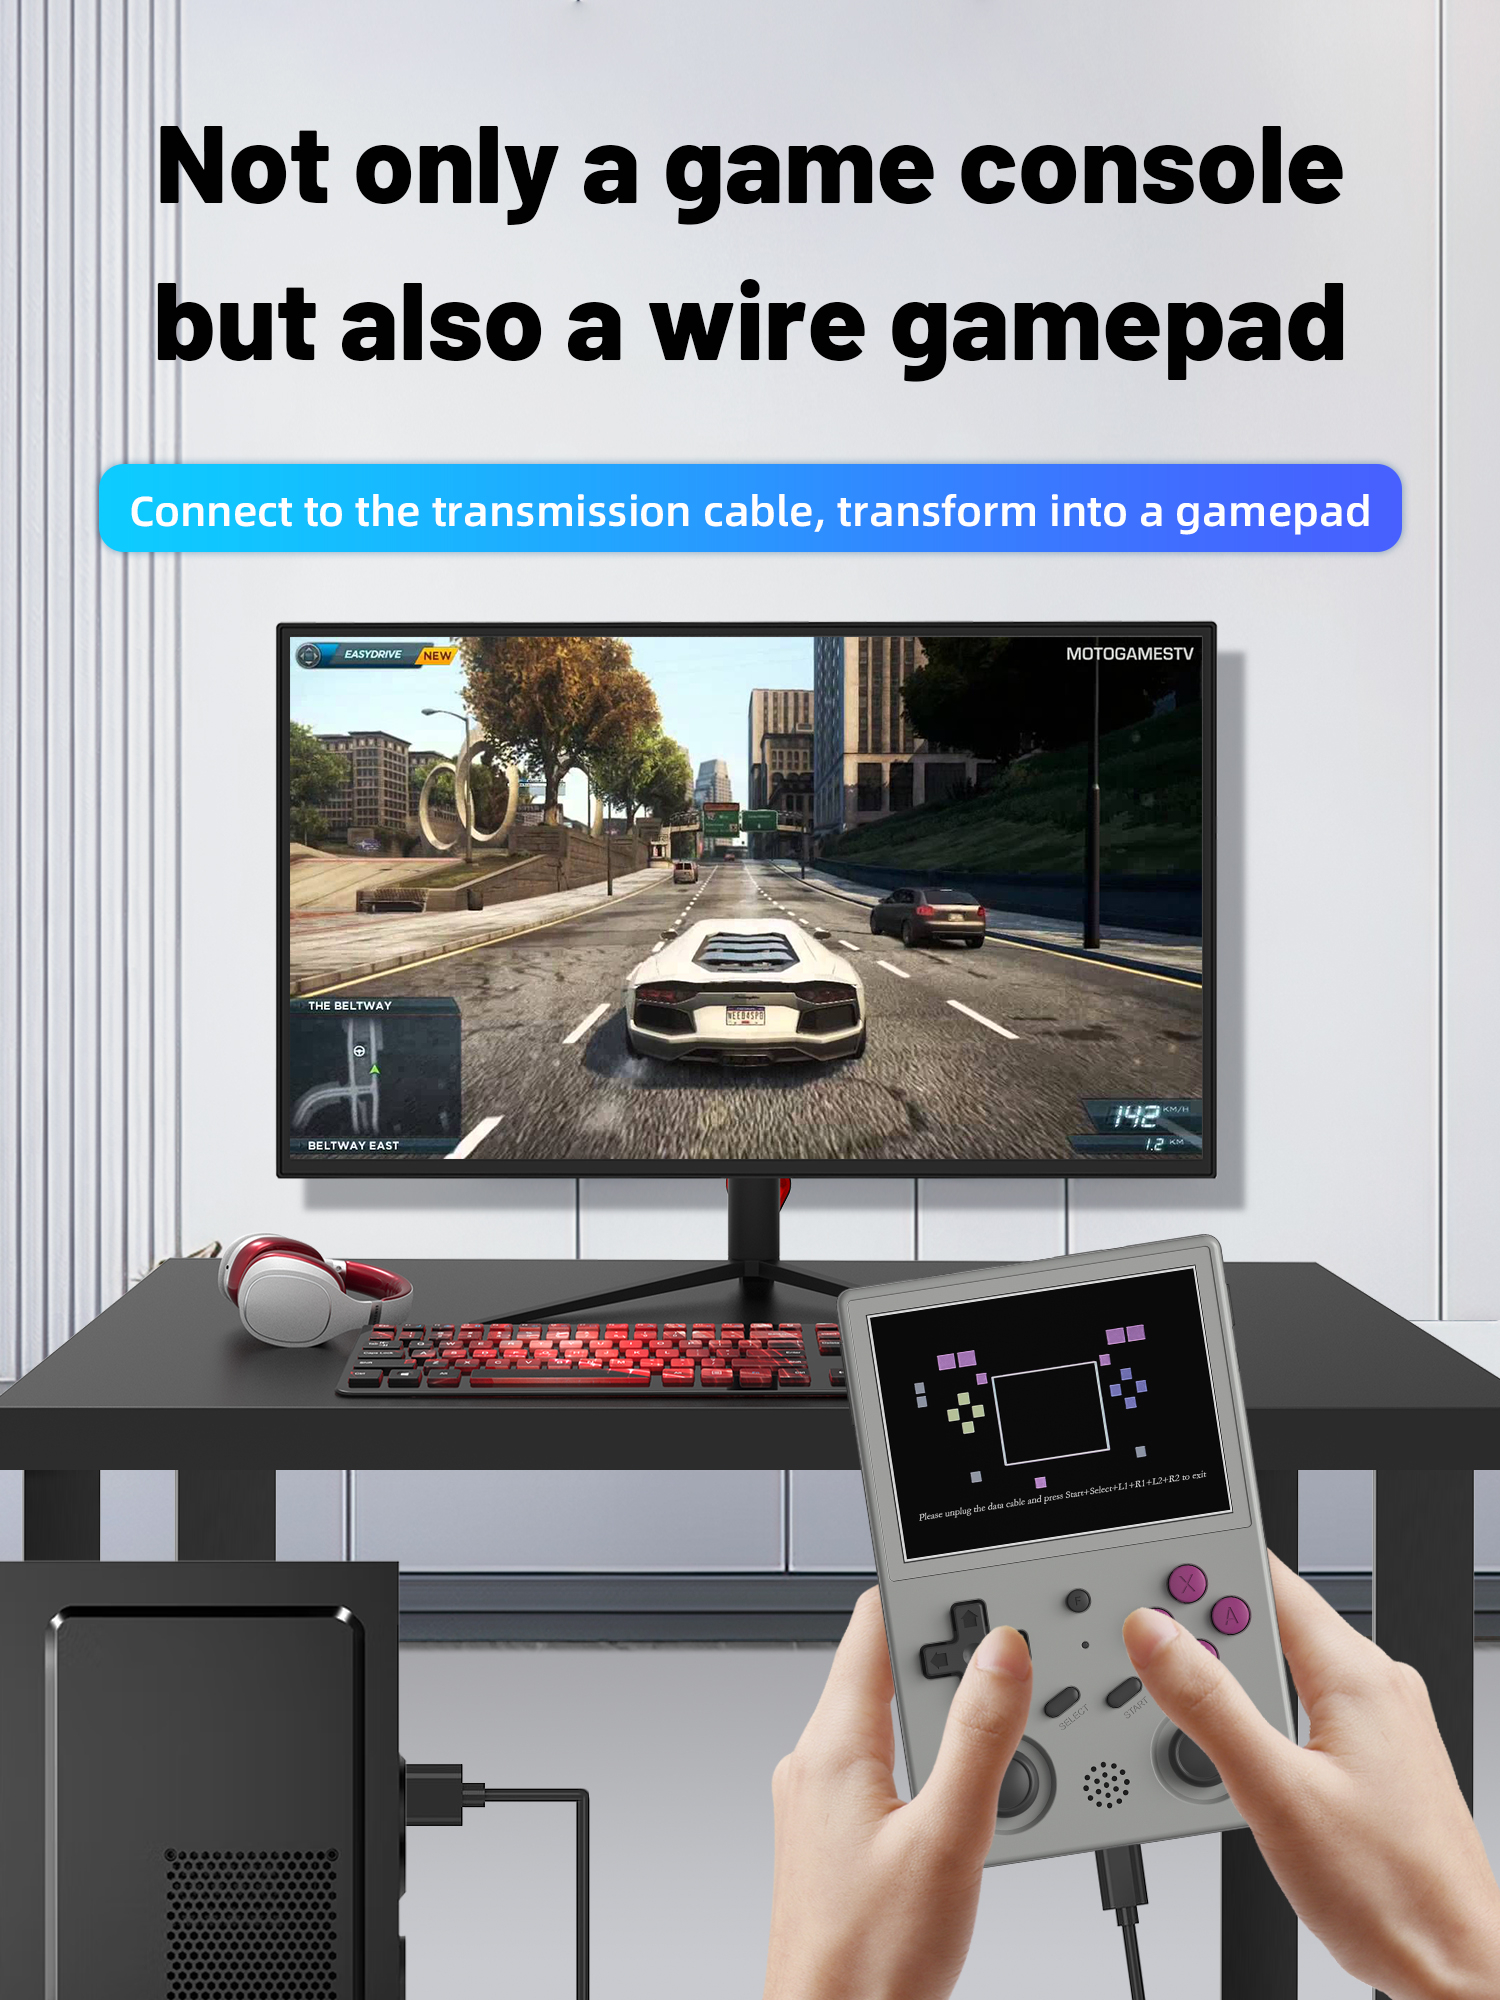 ANBERNIC RG353V 256GB 35000 Games Android Linux Dual OS Handheld Game Console LPDDR4 2GB RAM eMMC 5.1 32GB ROM 5G WiF BT4.2 3.5 inch IPS Full View Retro Video Game Player